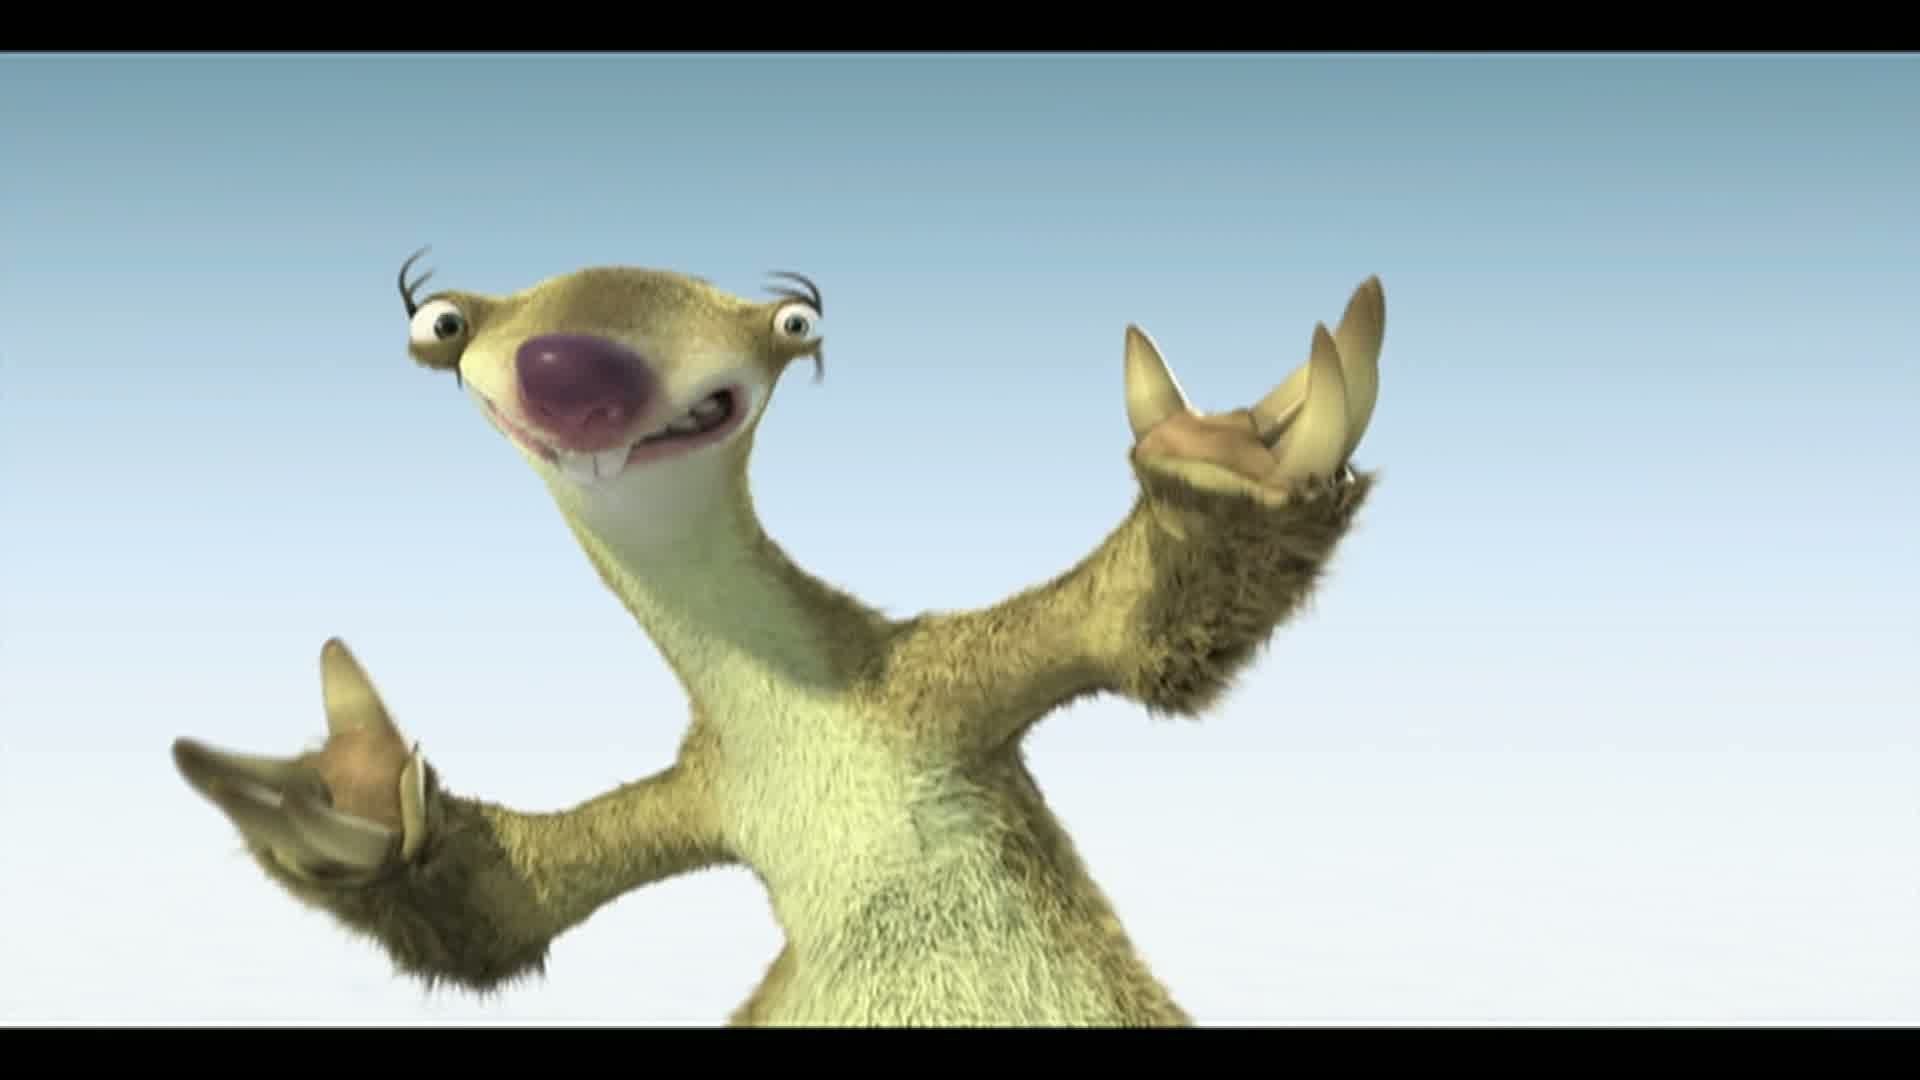 1920x1080 Ice Age: Sid images Sid Shuffle HD wallpaper and background photos